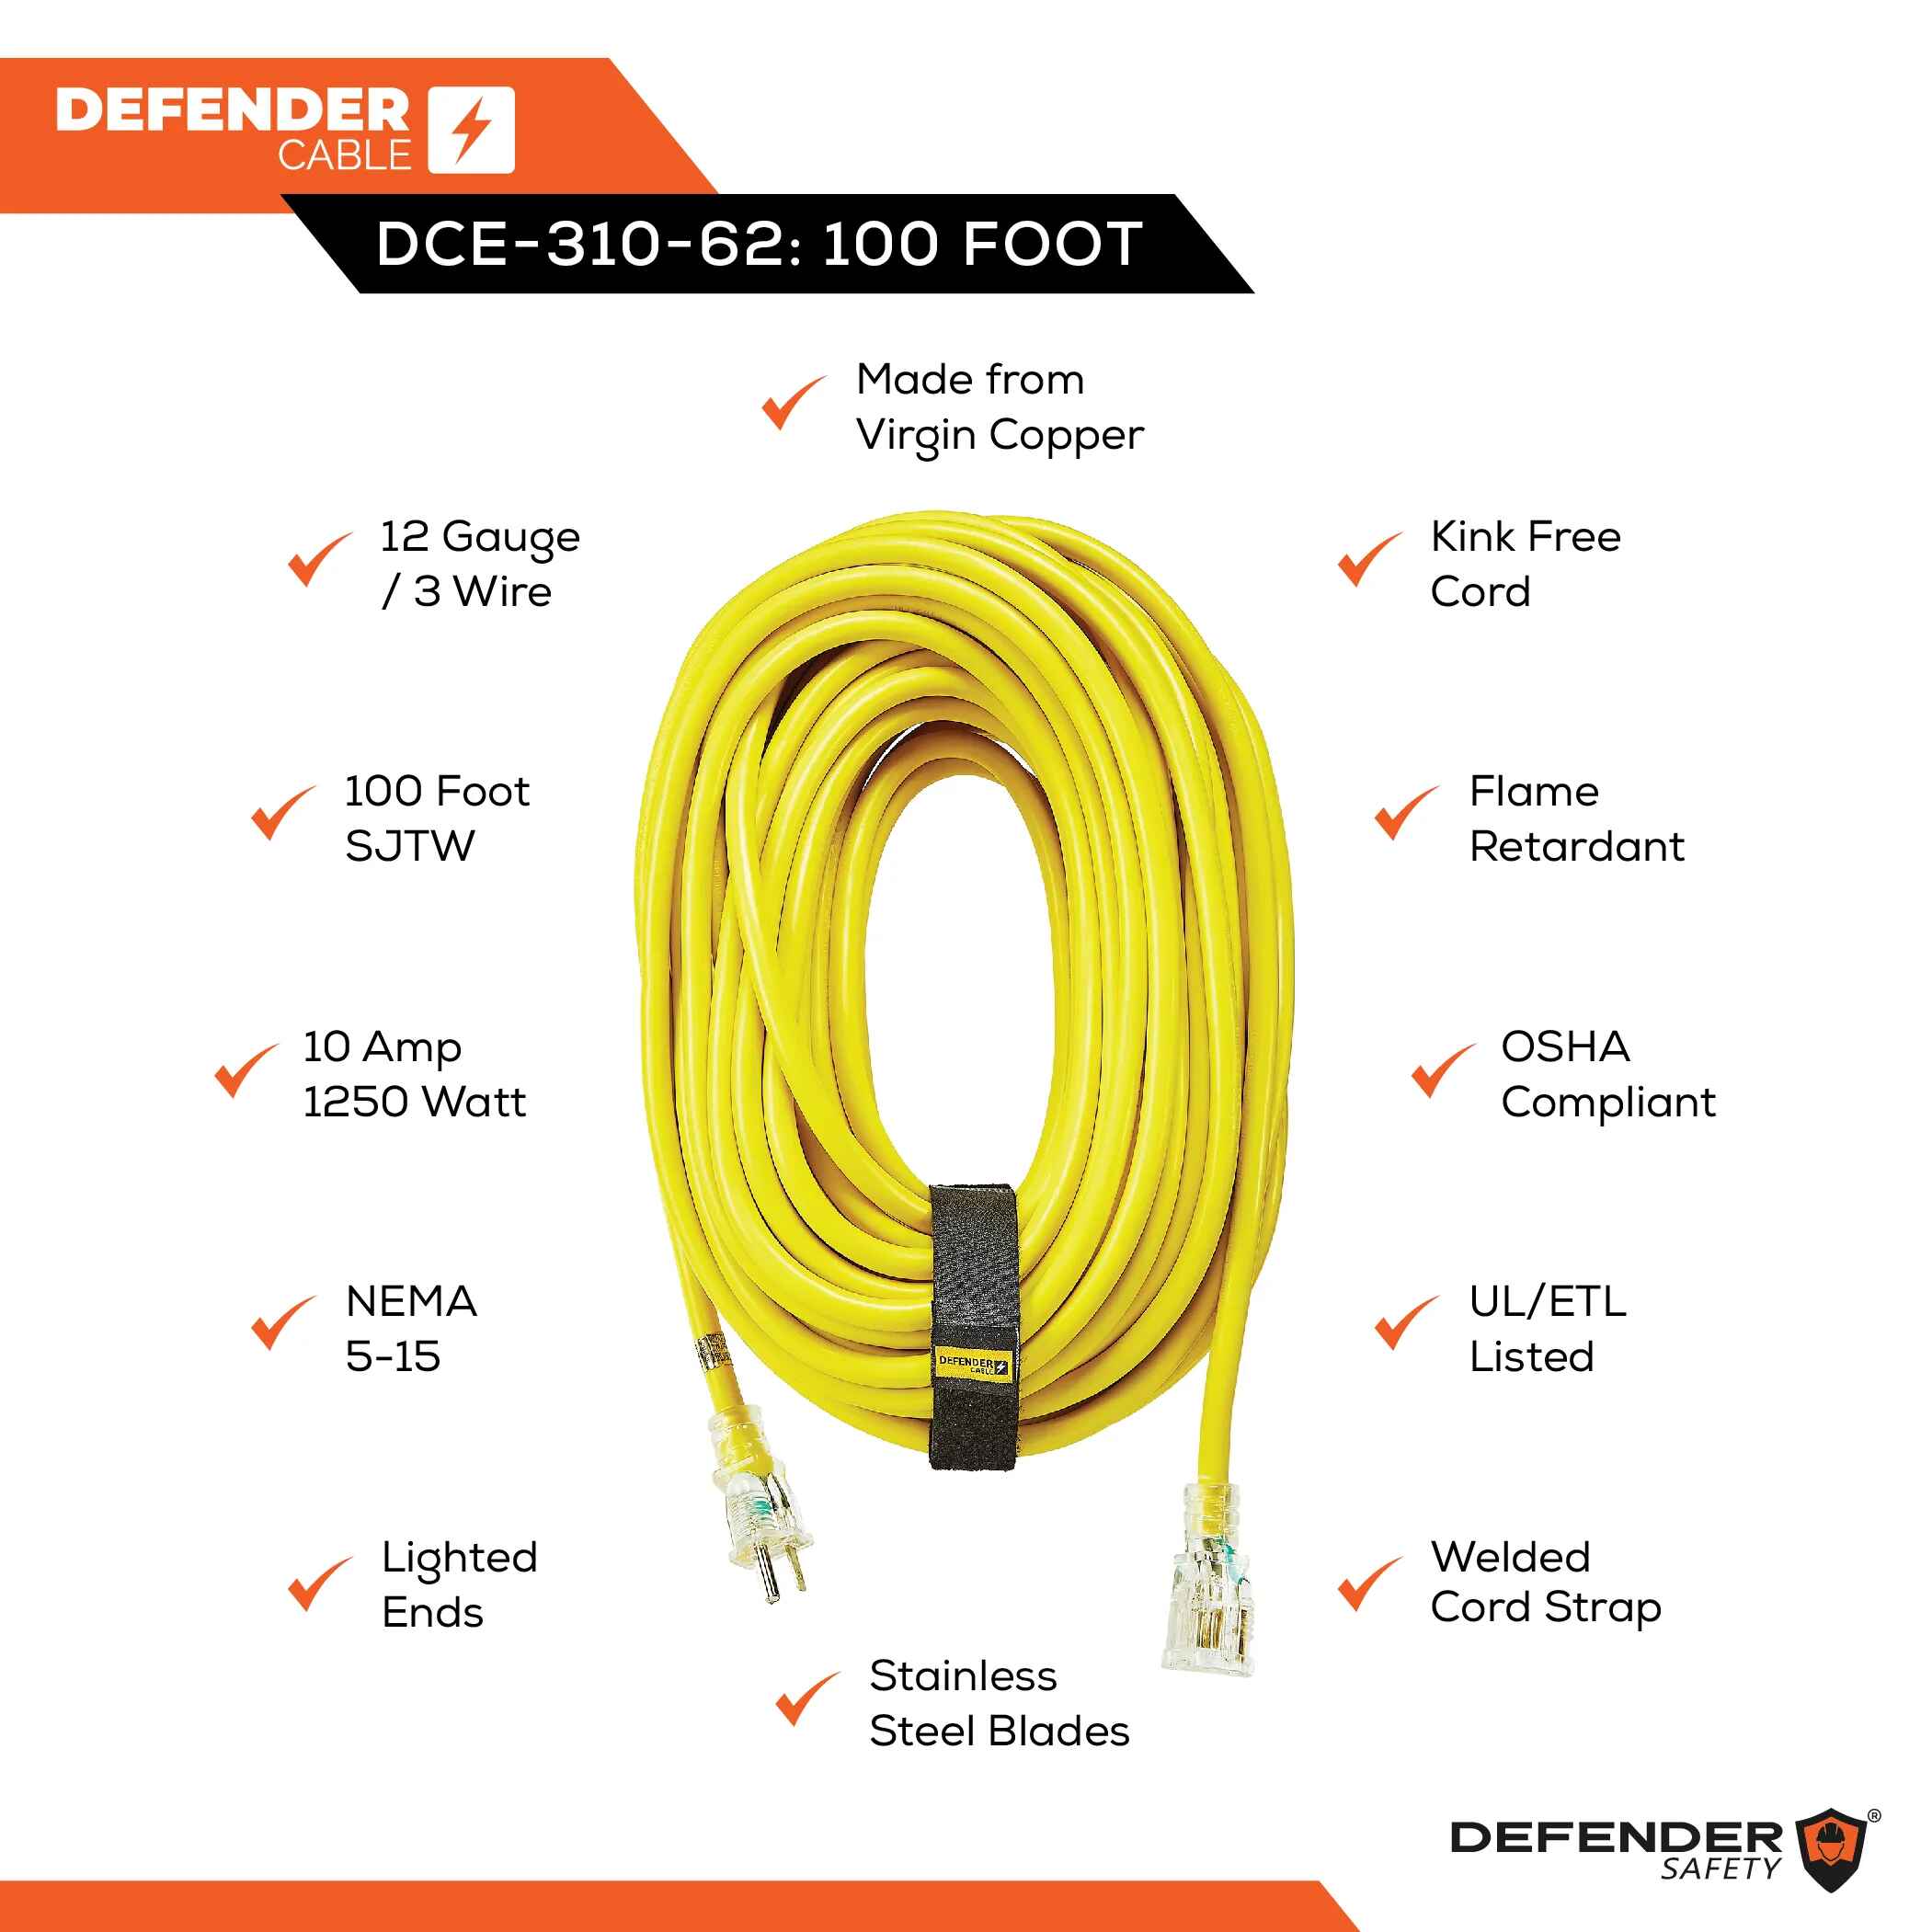 Extension Cords - Safety and how to choose the right size - Clean